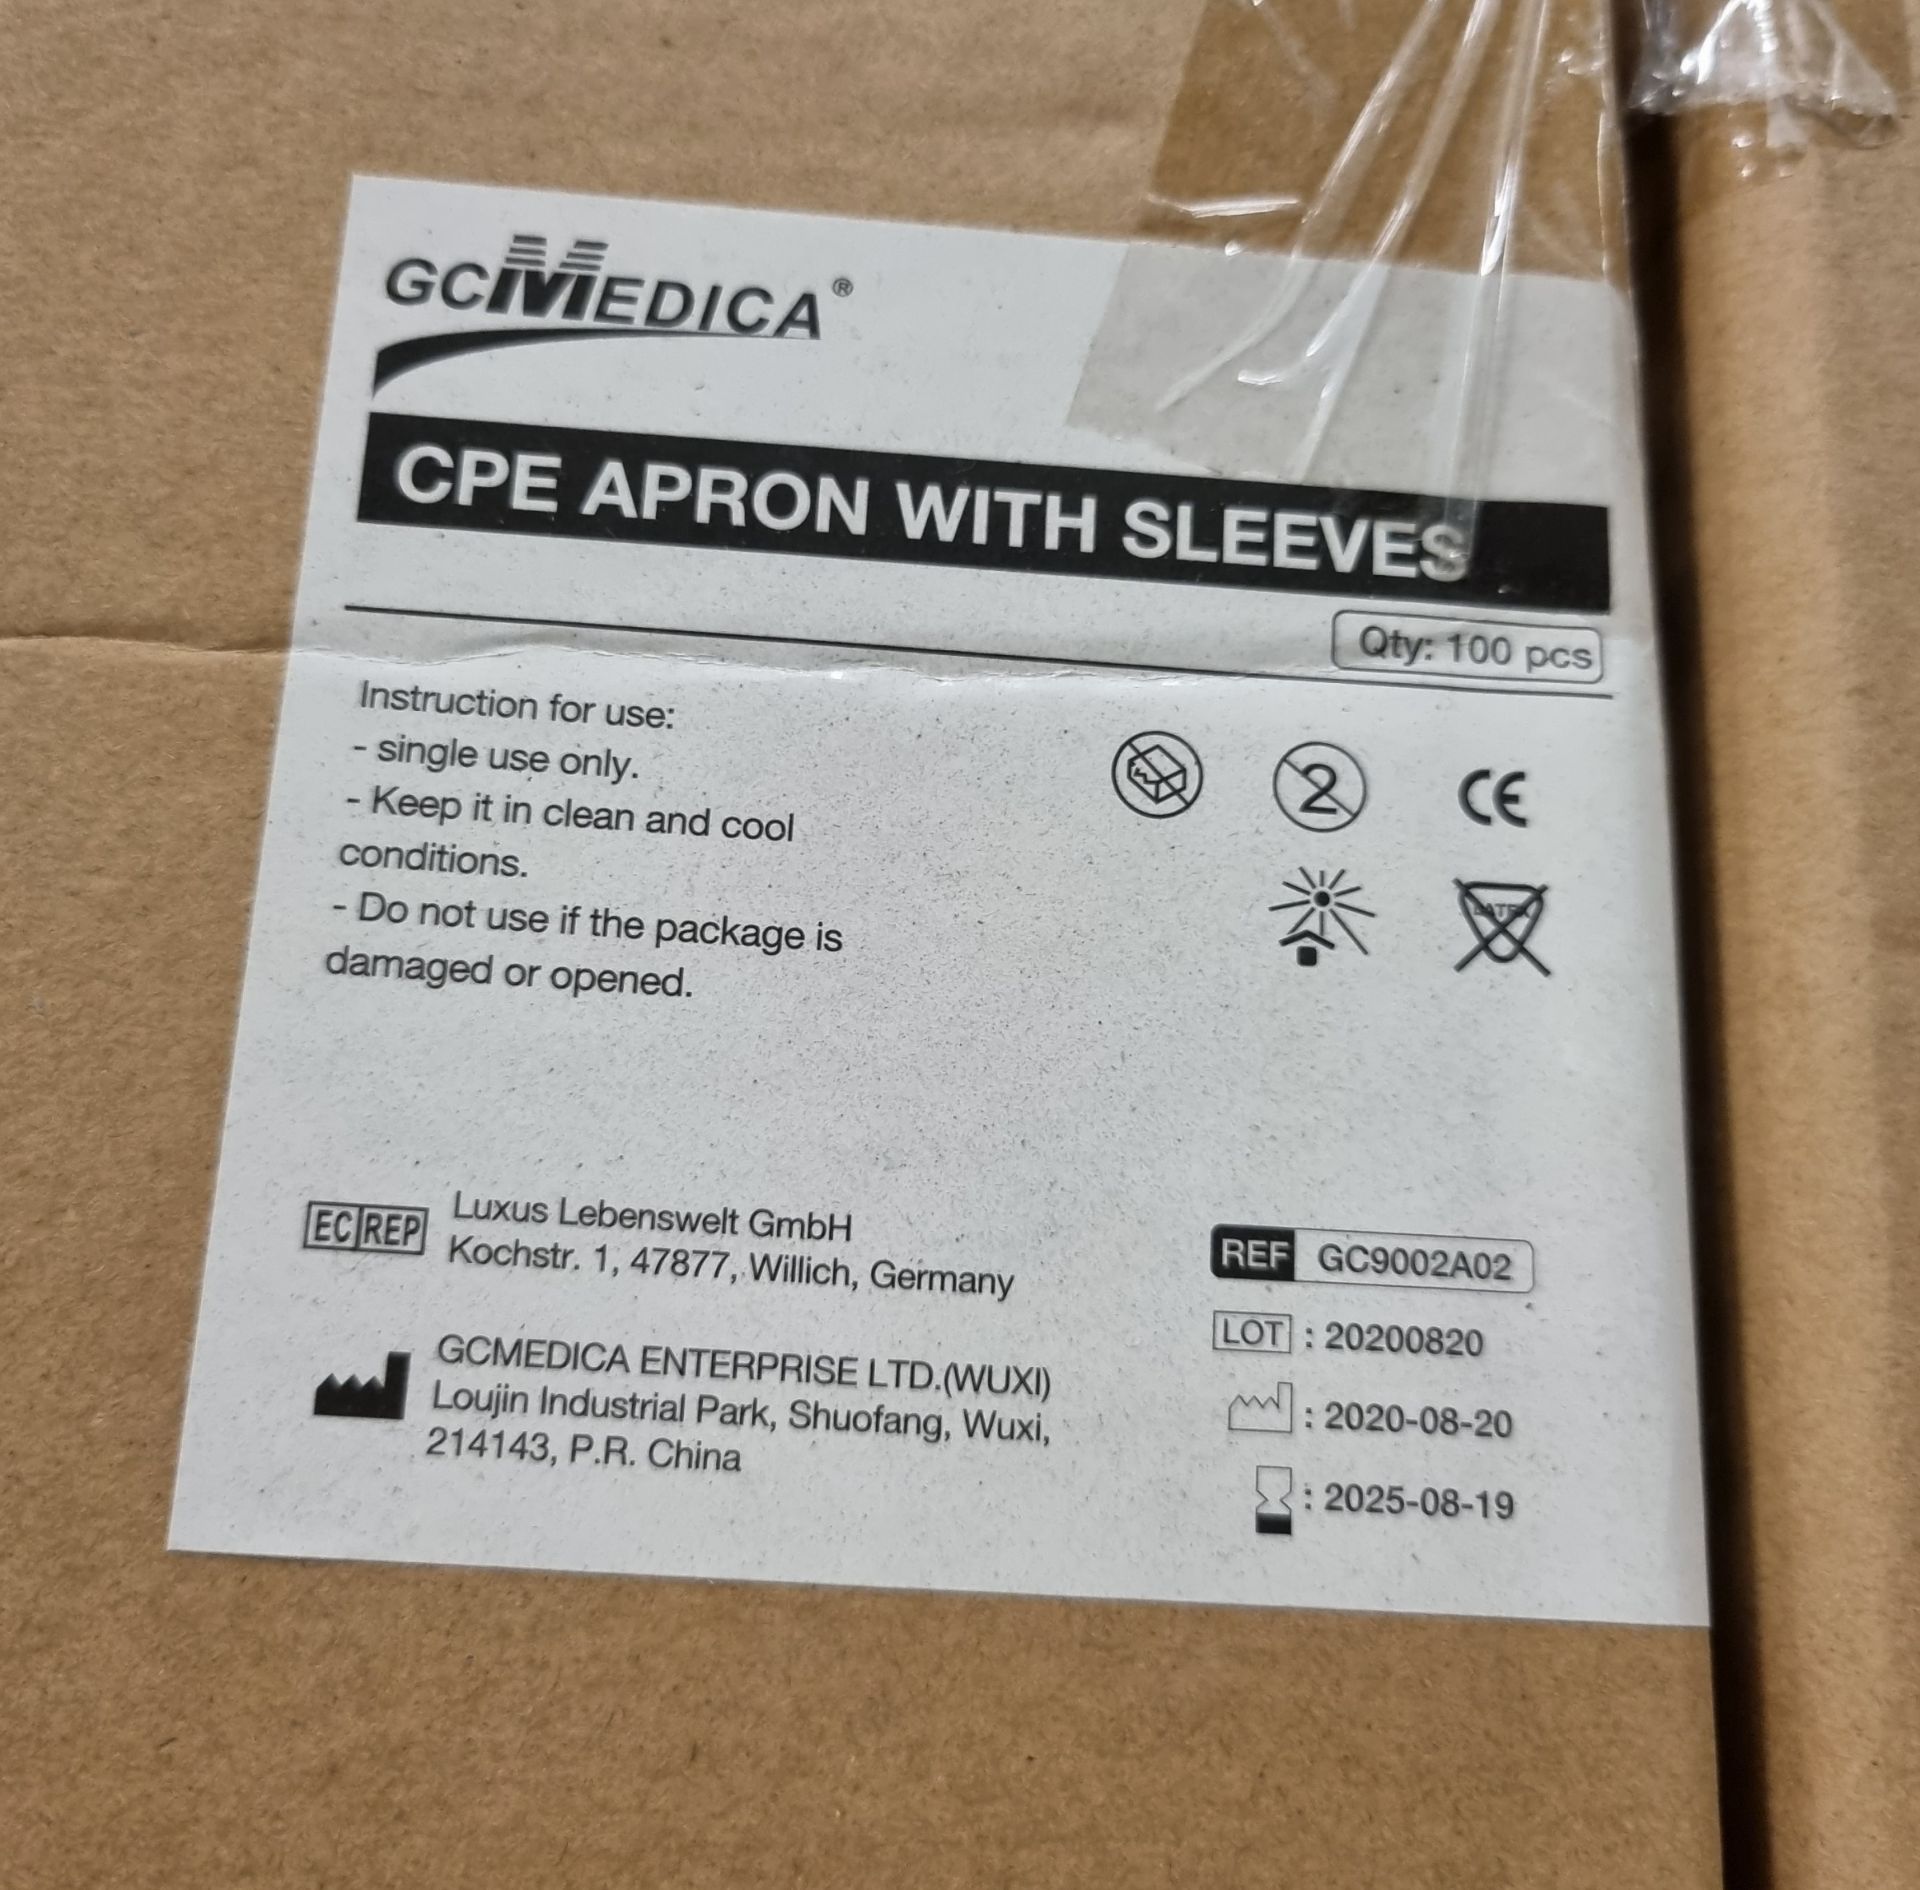 30x Boxes of CPE Aprons with sleeves - 100 units per box - Image 2 of 3